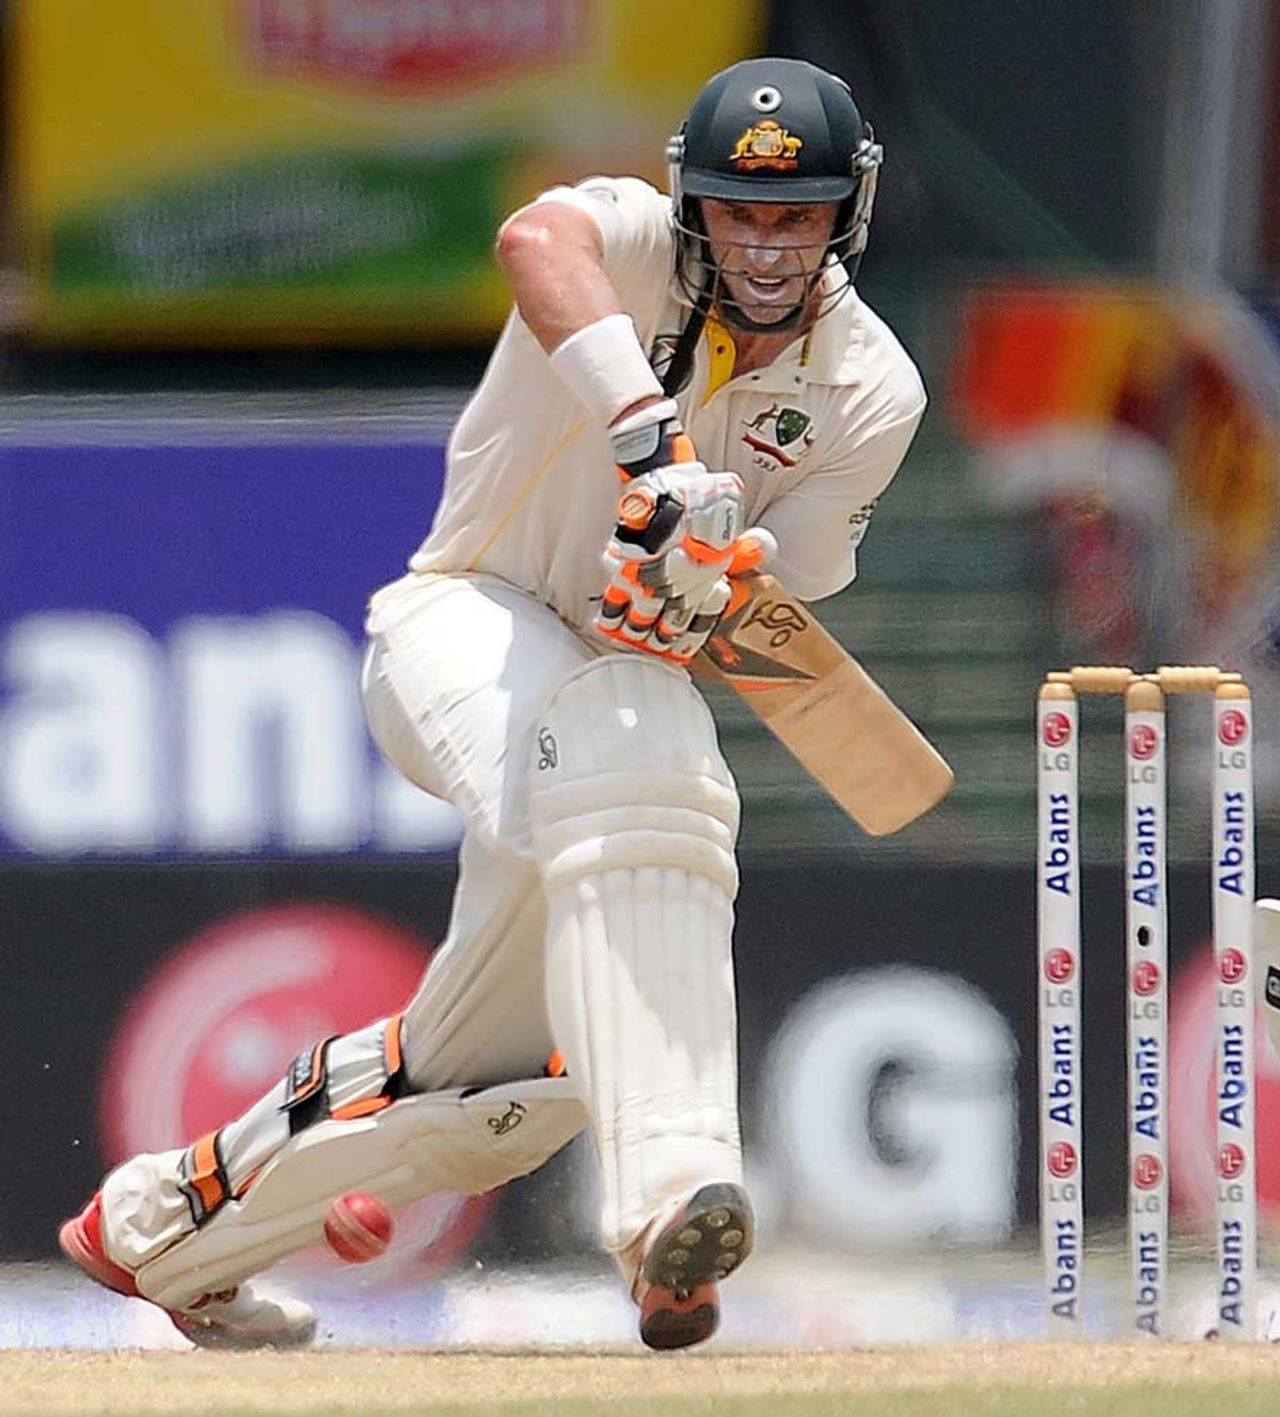 Michael Hussey watches the ball intently, Sri Lanka v Australia, 3rd Test, Colombo, 5th day, September 20, 2011